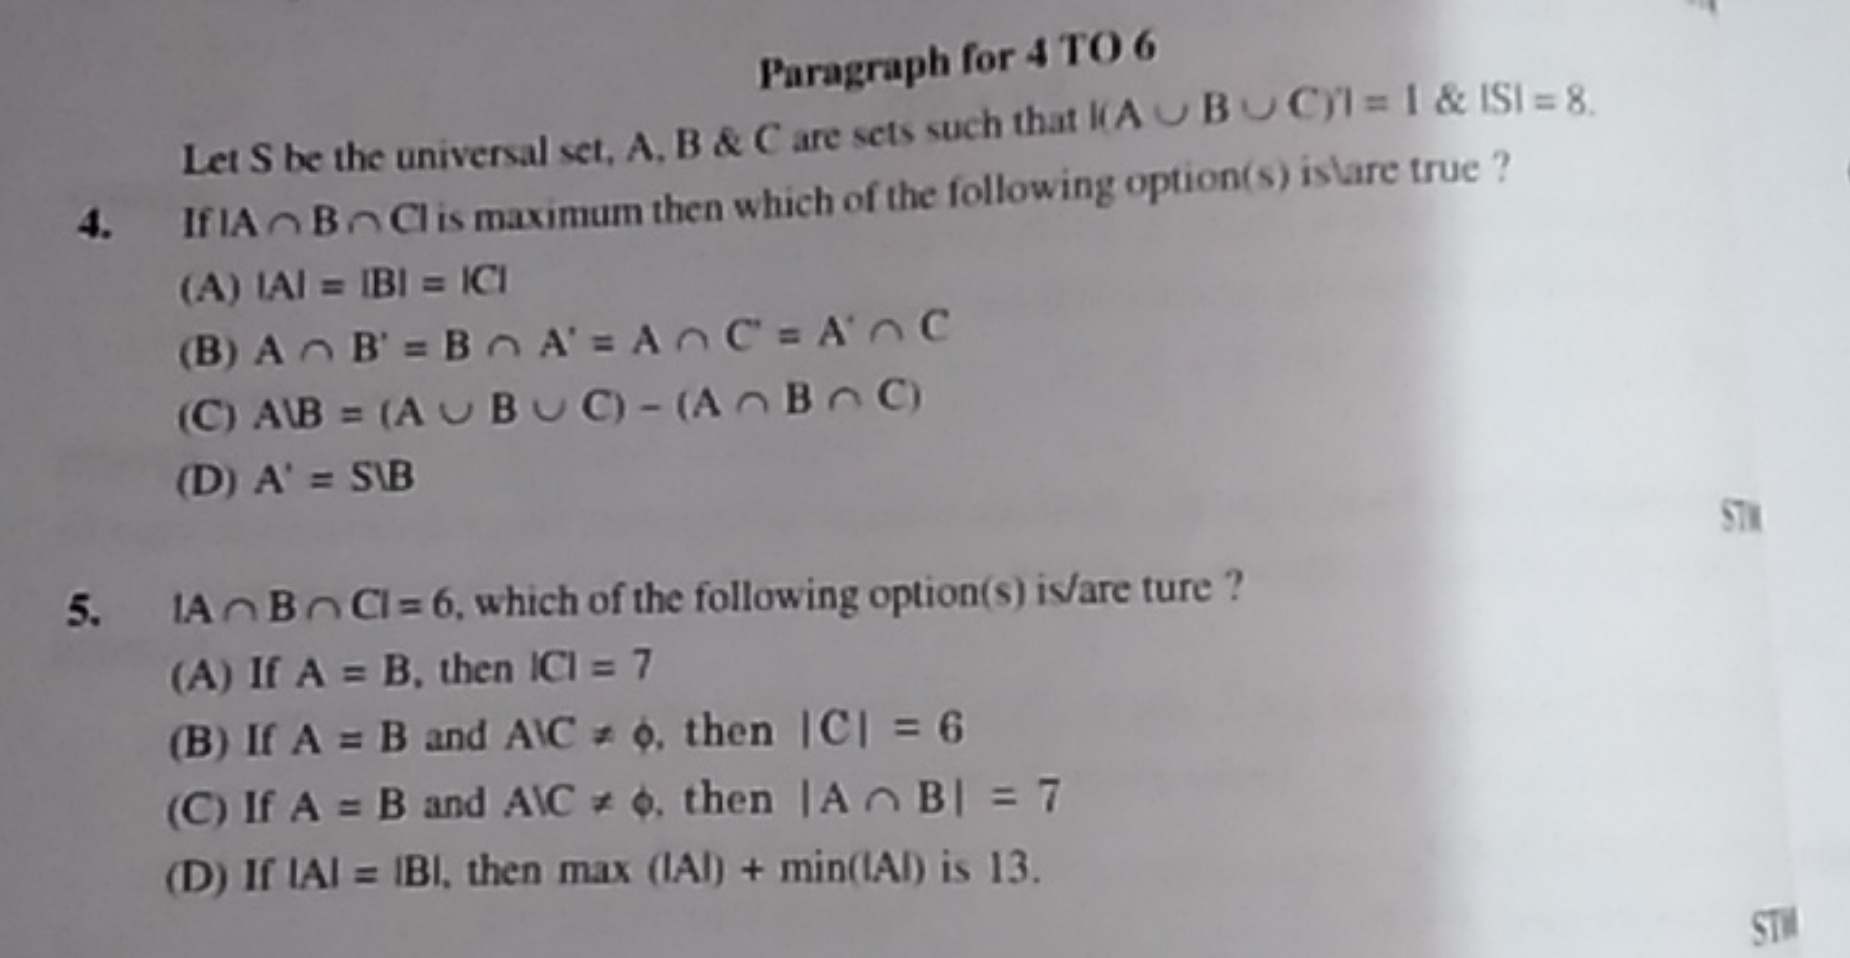 Paragraph for 4706 Let S be the universal set, A,B&C are sets such tha